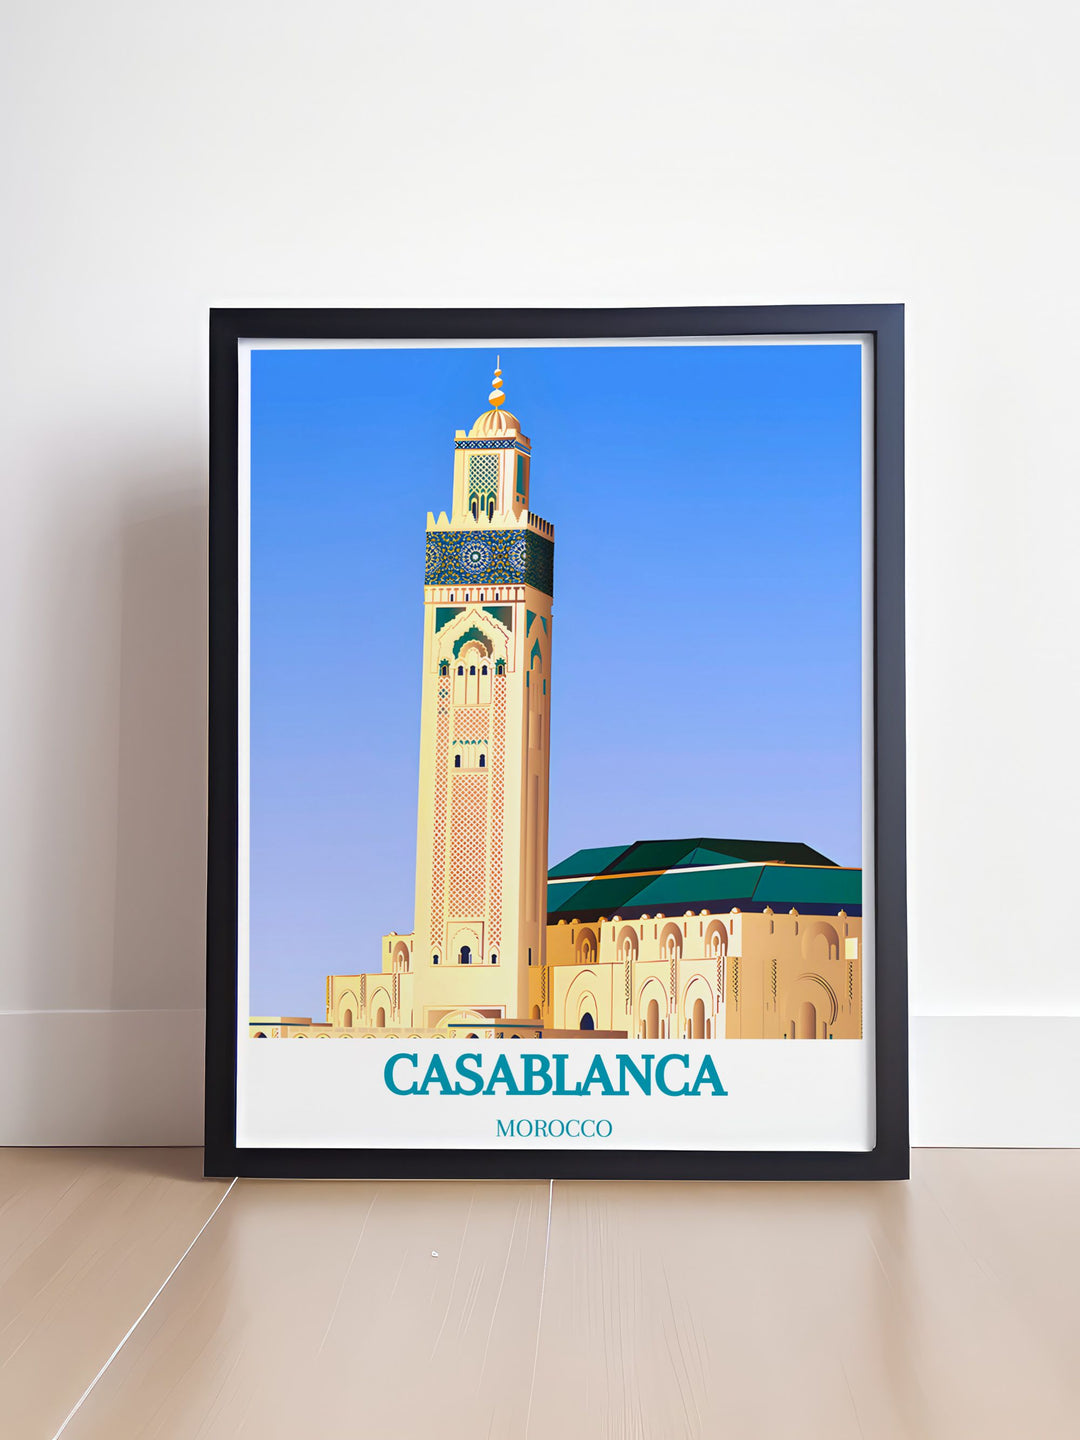 Showcasing Hassan II Mosques architectural beauty and Casablancas cultural vibrancy, this poster is ideal for art lovers who appreciate the diverse and stunning landscapes of Morocco.